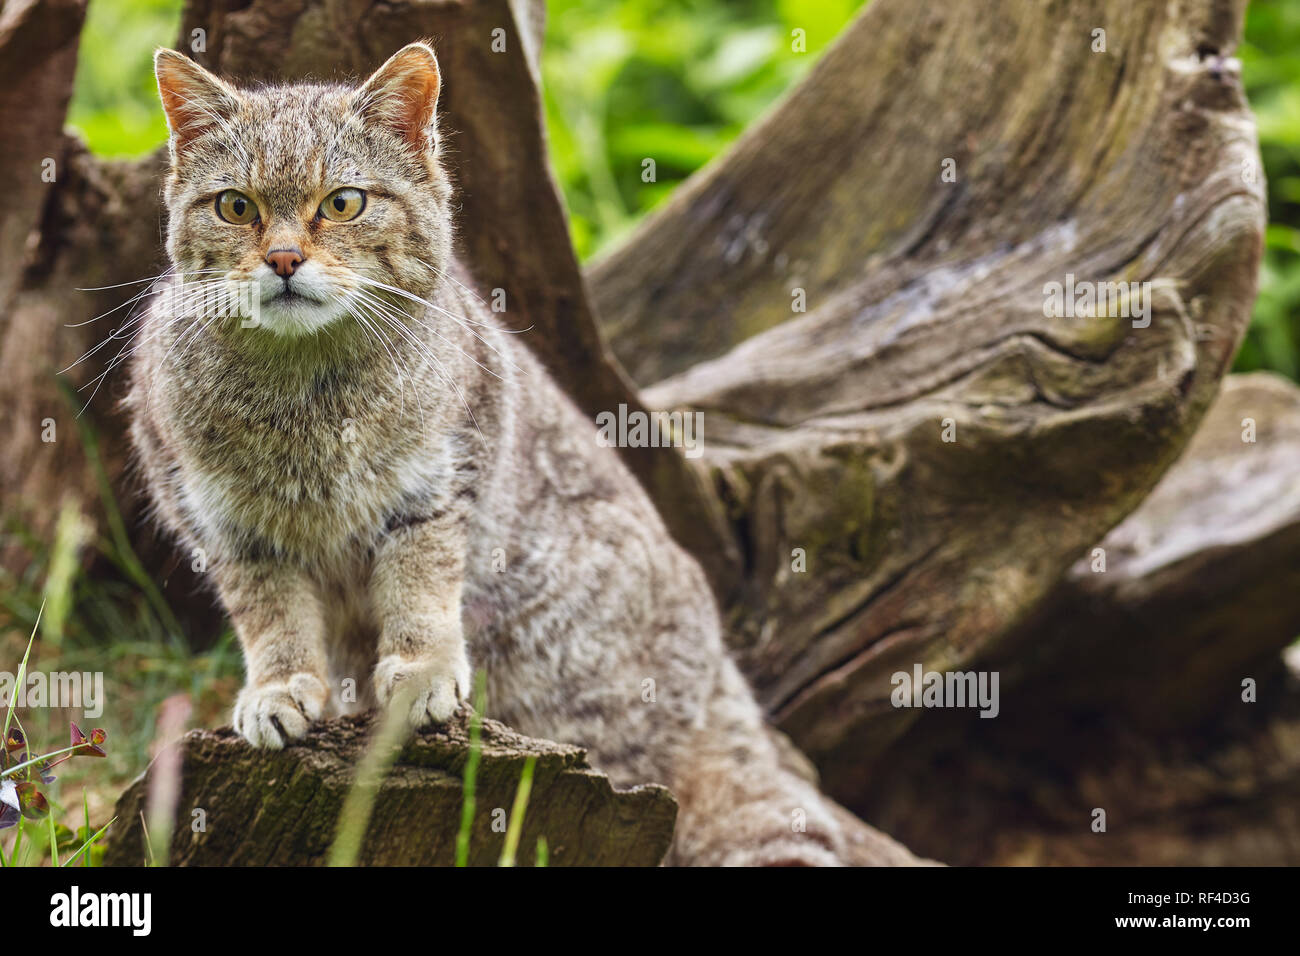 Portrait of a Scottish Wildcat, Felis silvestris silvestris, at a captive breeding centred aimed at protecting this endangered species from extinction Stock Photo